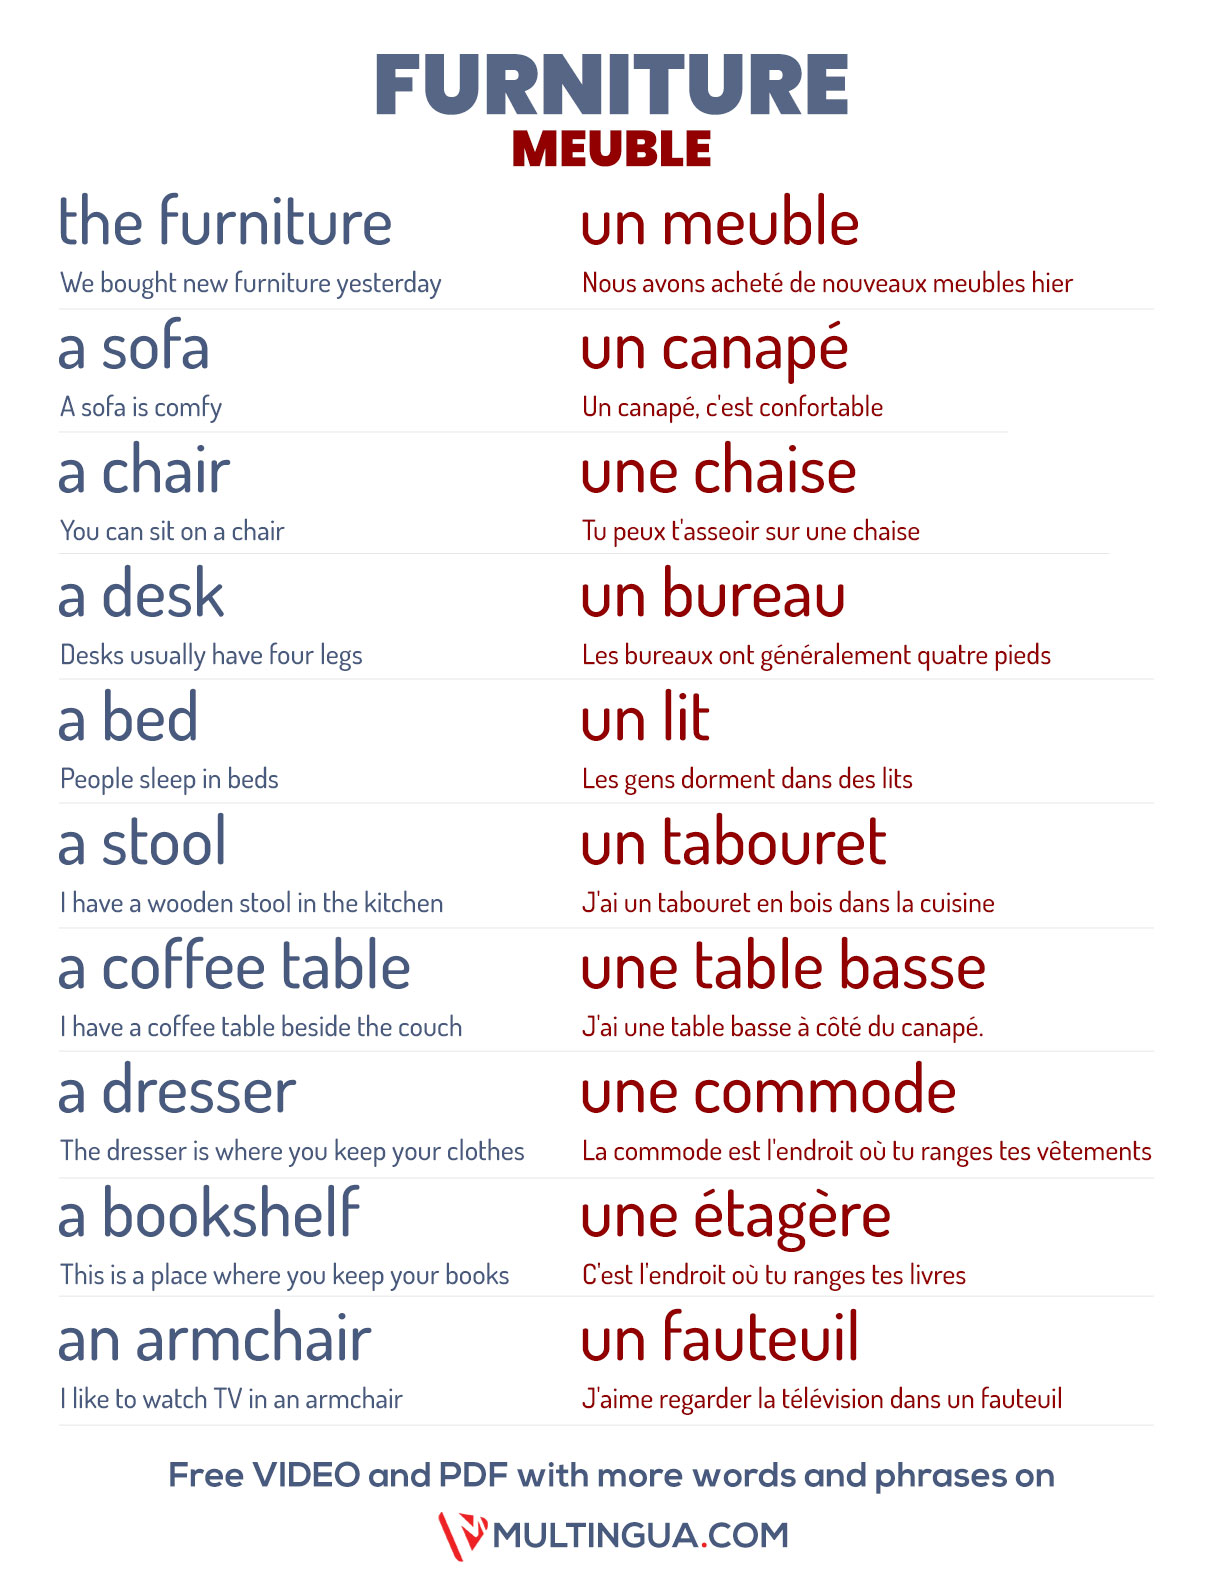 Furniture in French